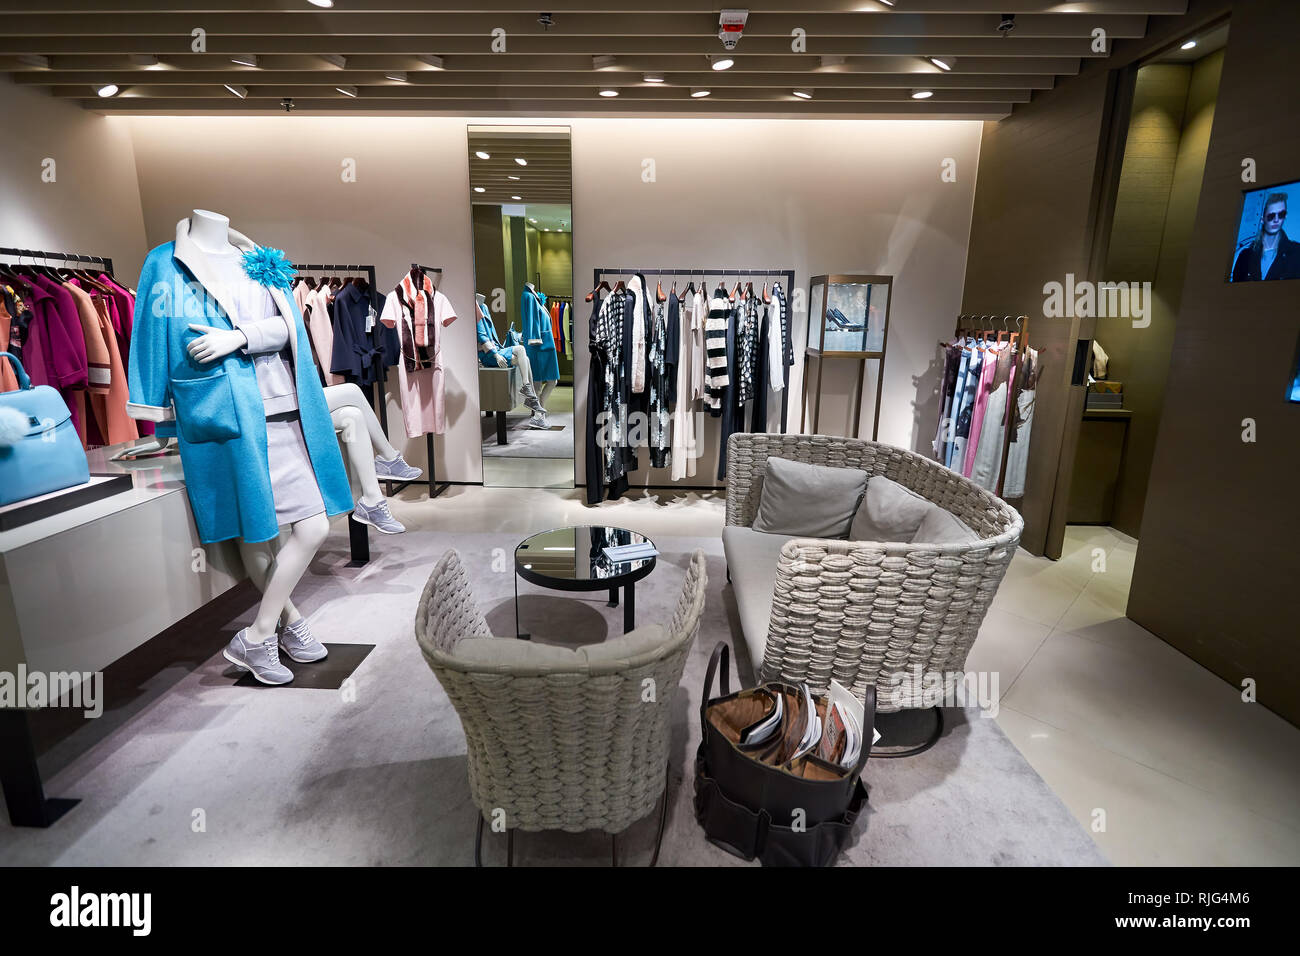 HONG KONG - JANUARY 26, 2016: design of Balenciaga store at Elements  Shopping Mall. Balenciaga is a European luxury fashion house founded by  Cristobal Stock Photo - Alamy